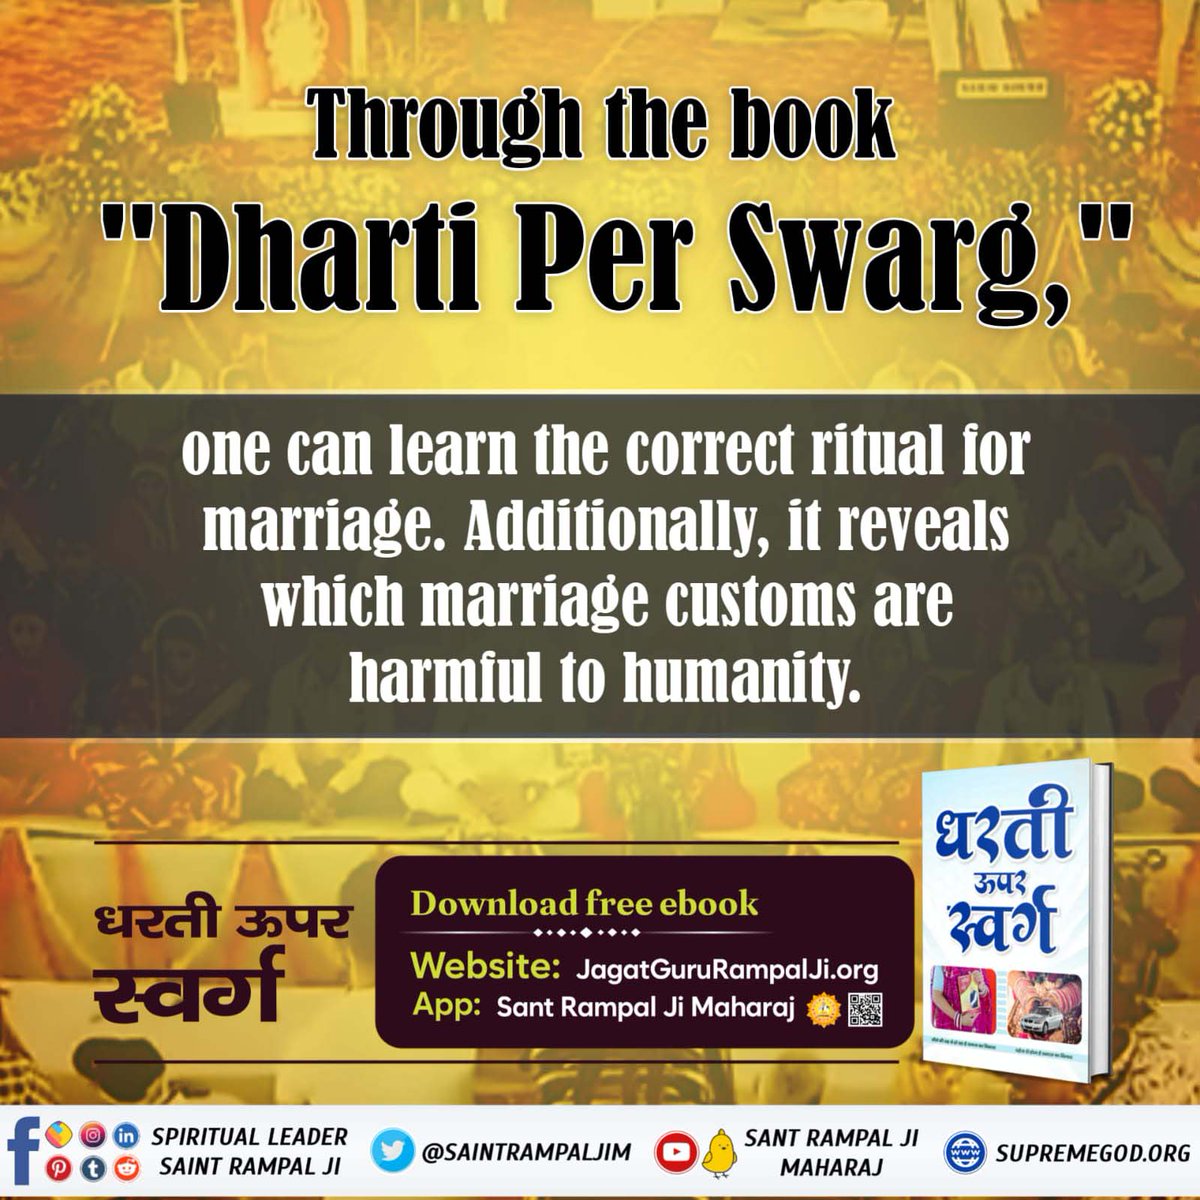 #धरती_को_स्वर्ग_बनाना_है
Through the book 'Dharti Upar Swarg'
One can learn the correct ritual for marriage. Additionally, it reveals wich marriage customs are harmful to humanity.

Sant Rampal Ji Maharaj